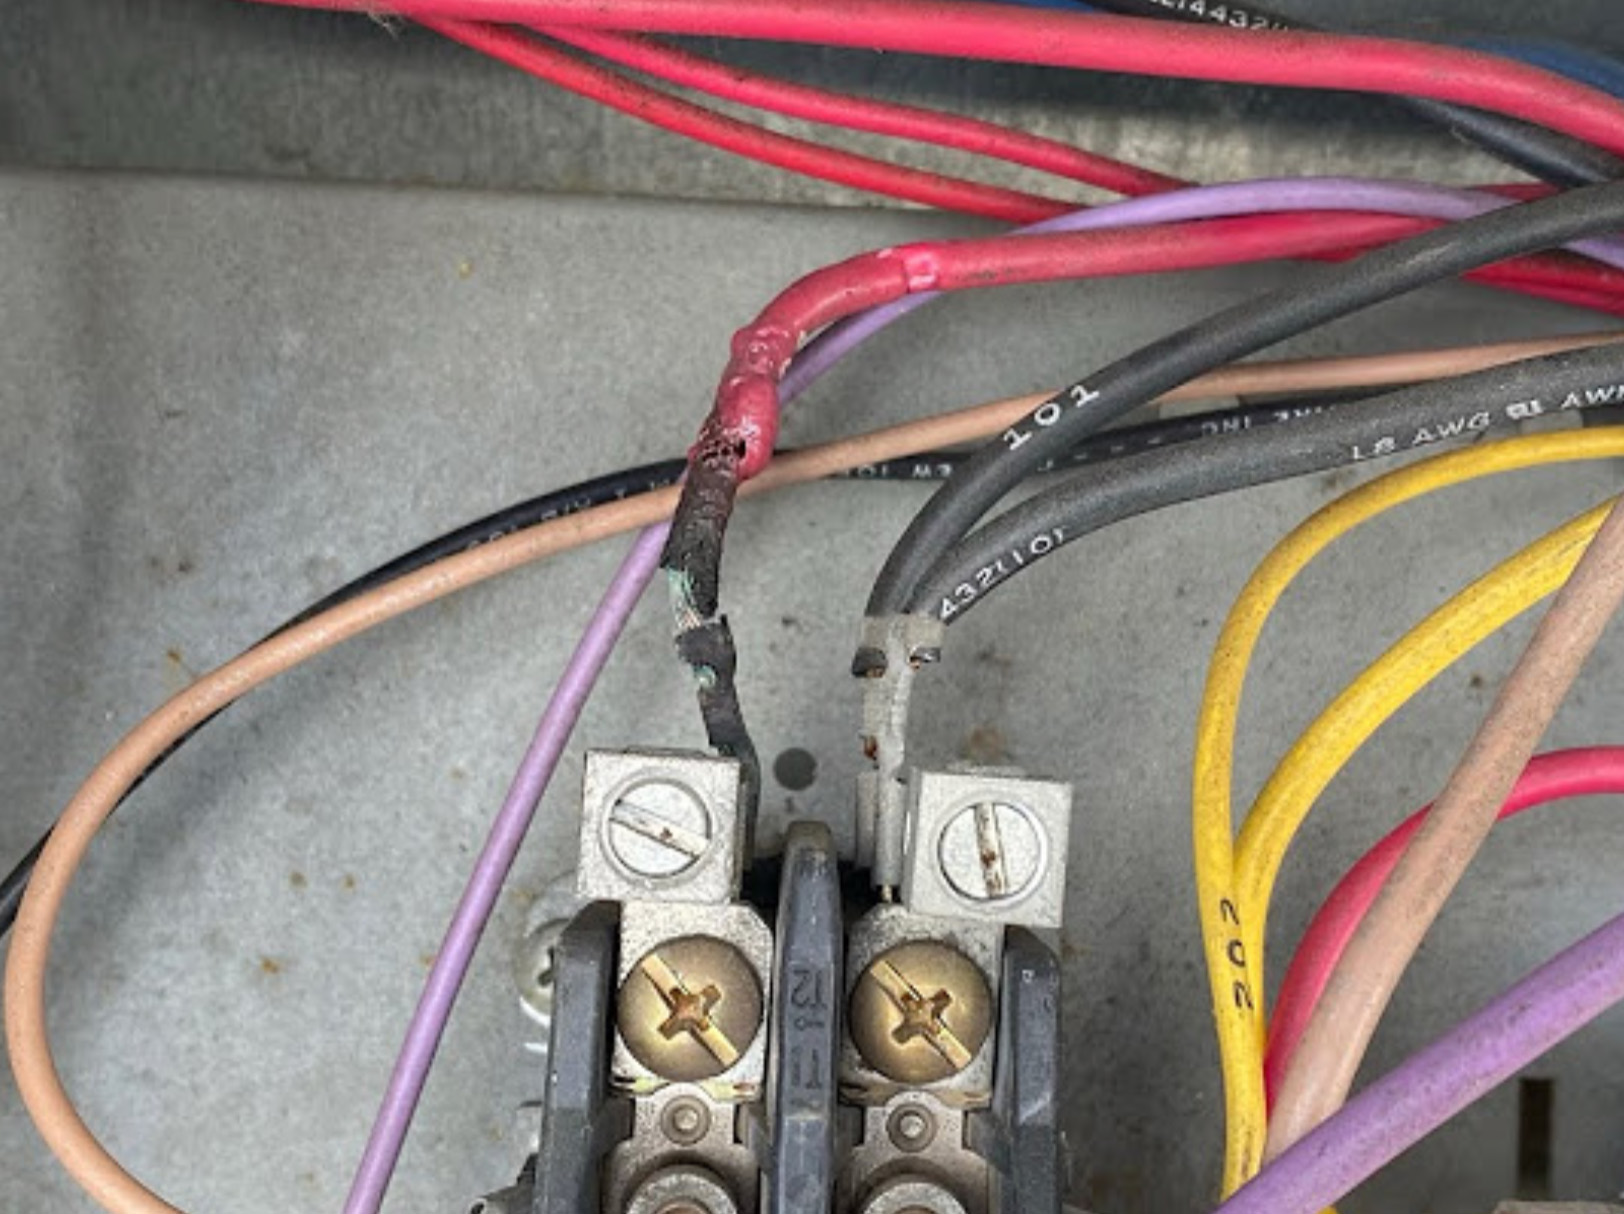 Cords and switches to furnace